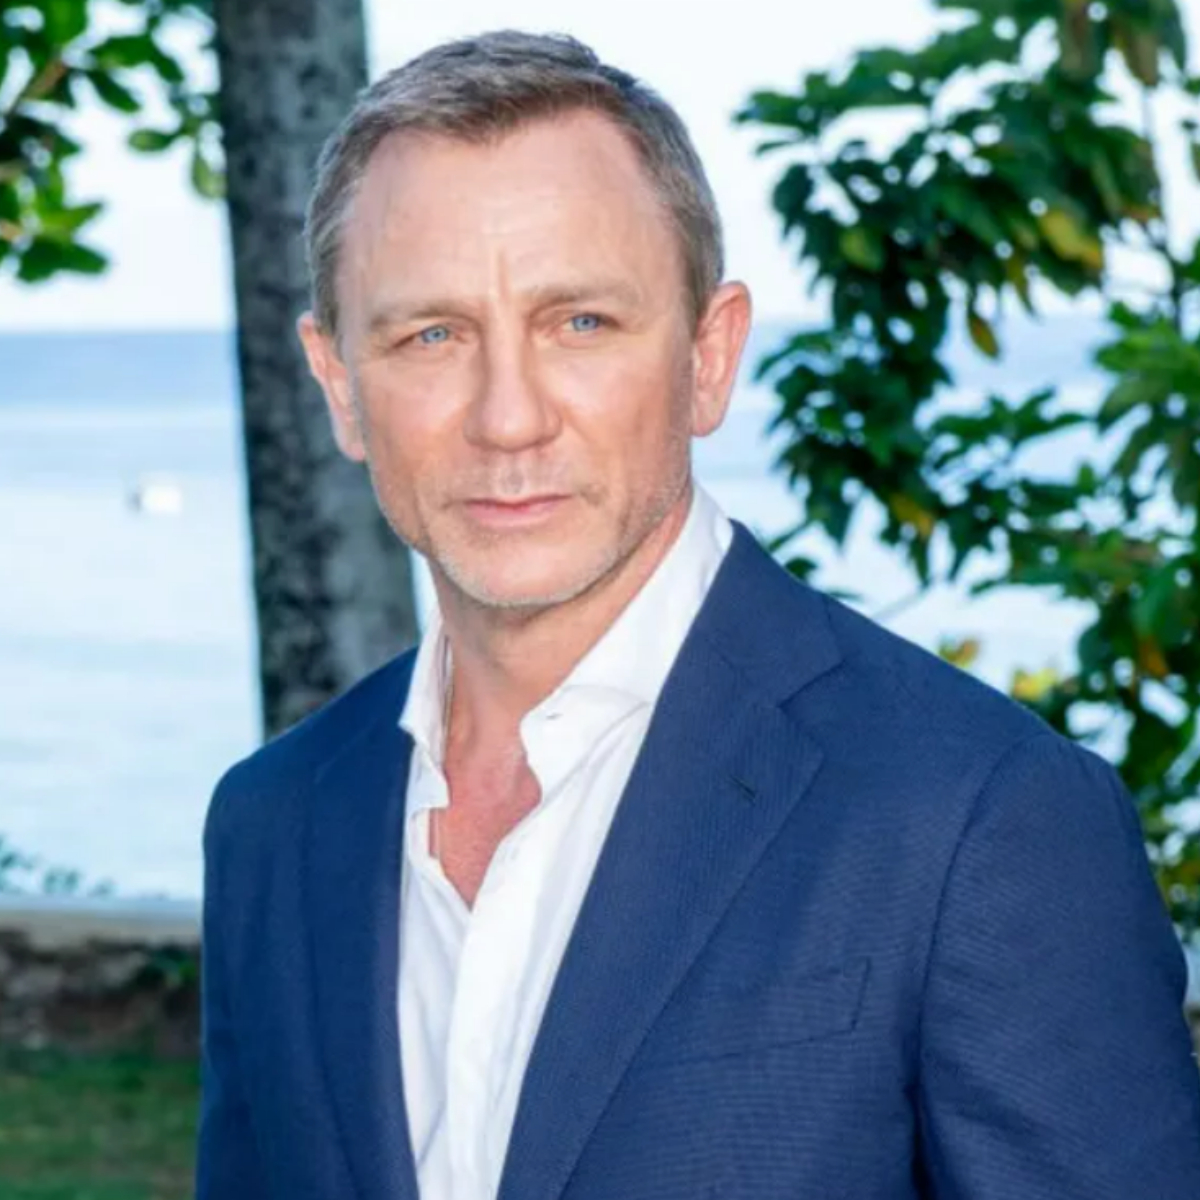 Here are the reasons why Daniel Craig’s Bond is our favorite among all Bond heroes!